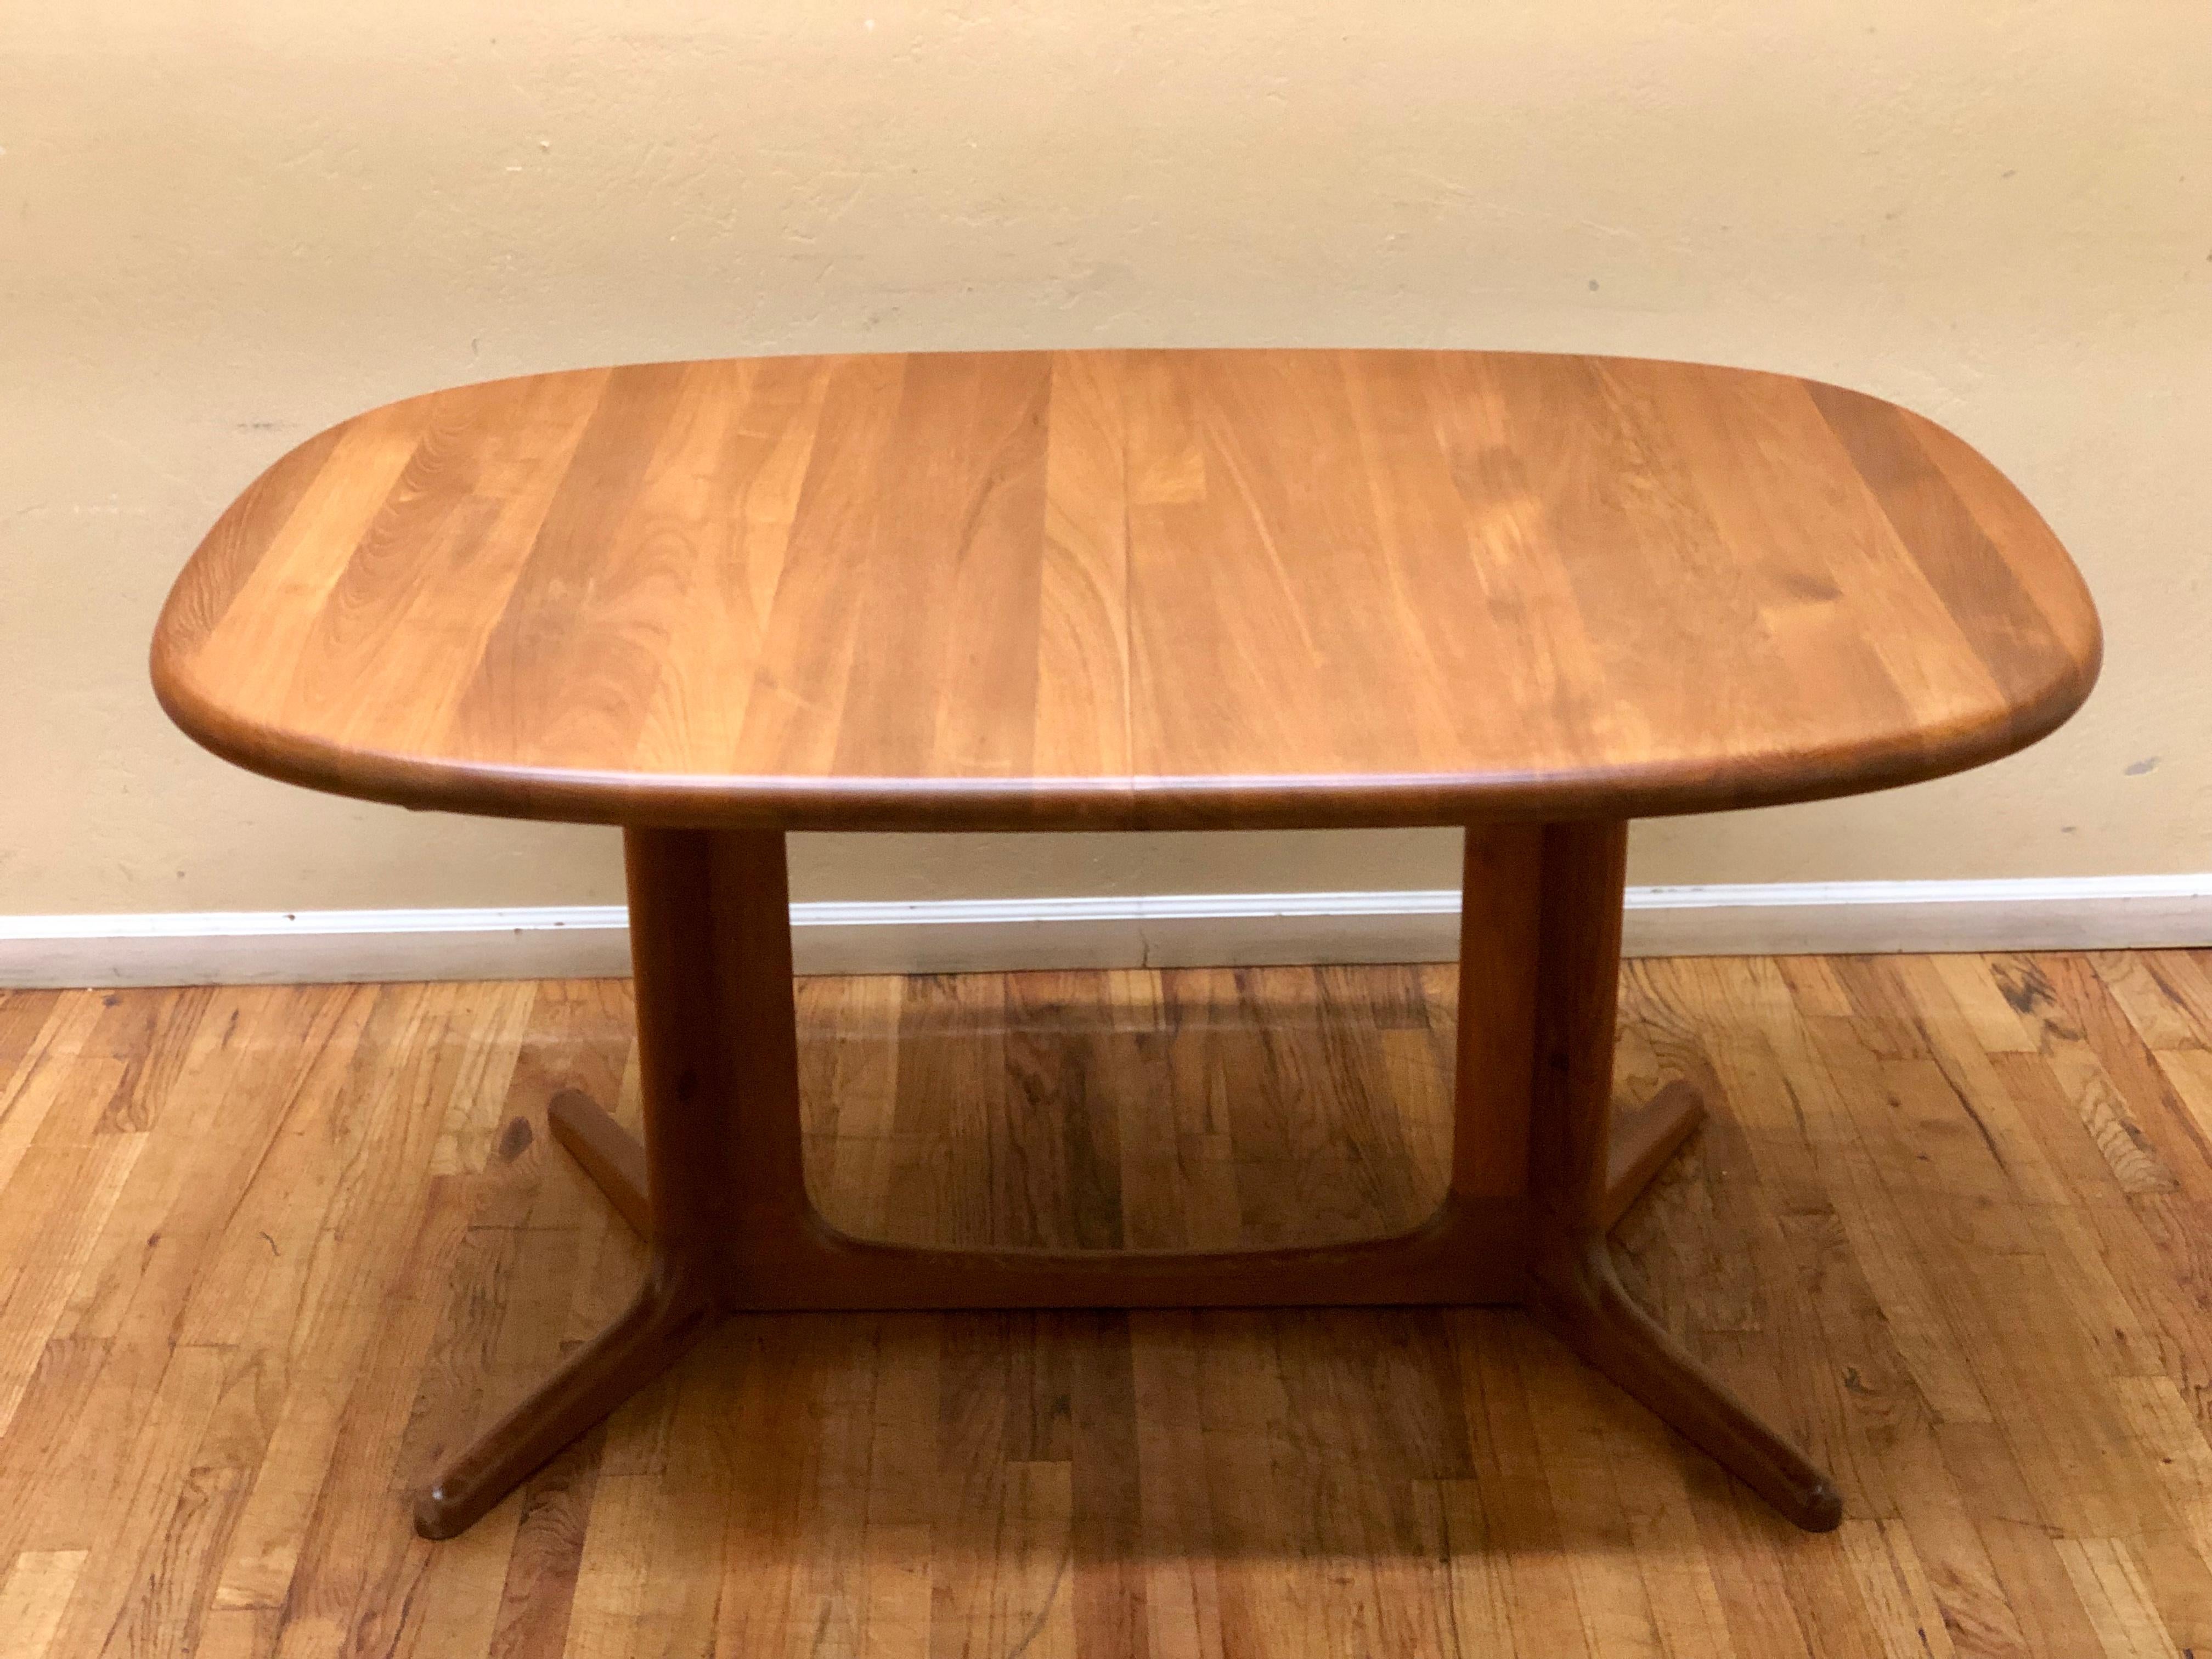 Beautiful solid teak dining table Danish design by Glostrup with quality control tag and freshly refinished, 2 leafs each measures 19.25 inches and the table its 60 inches wide the close.